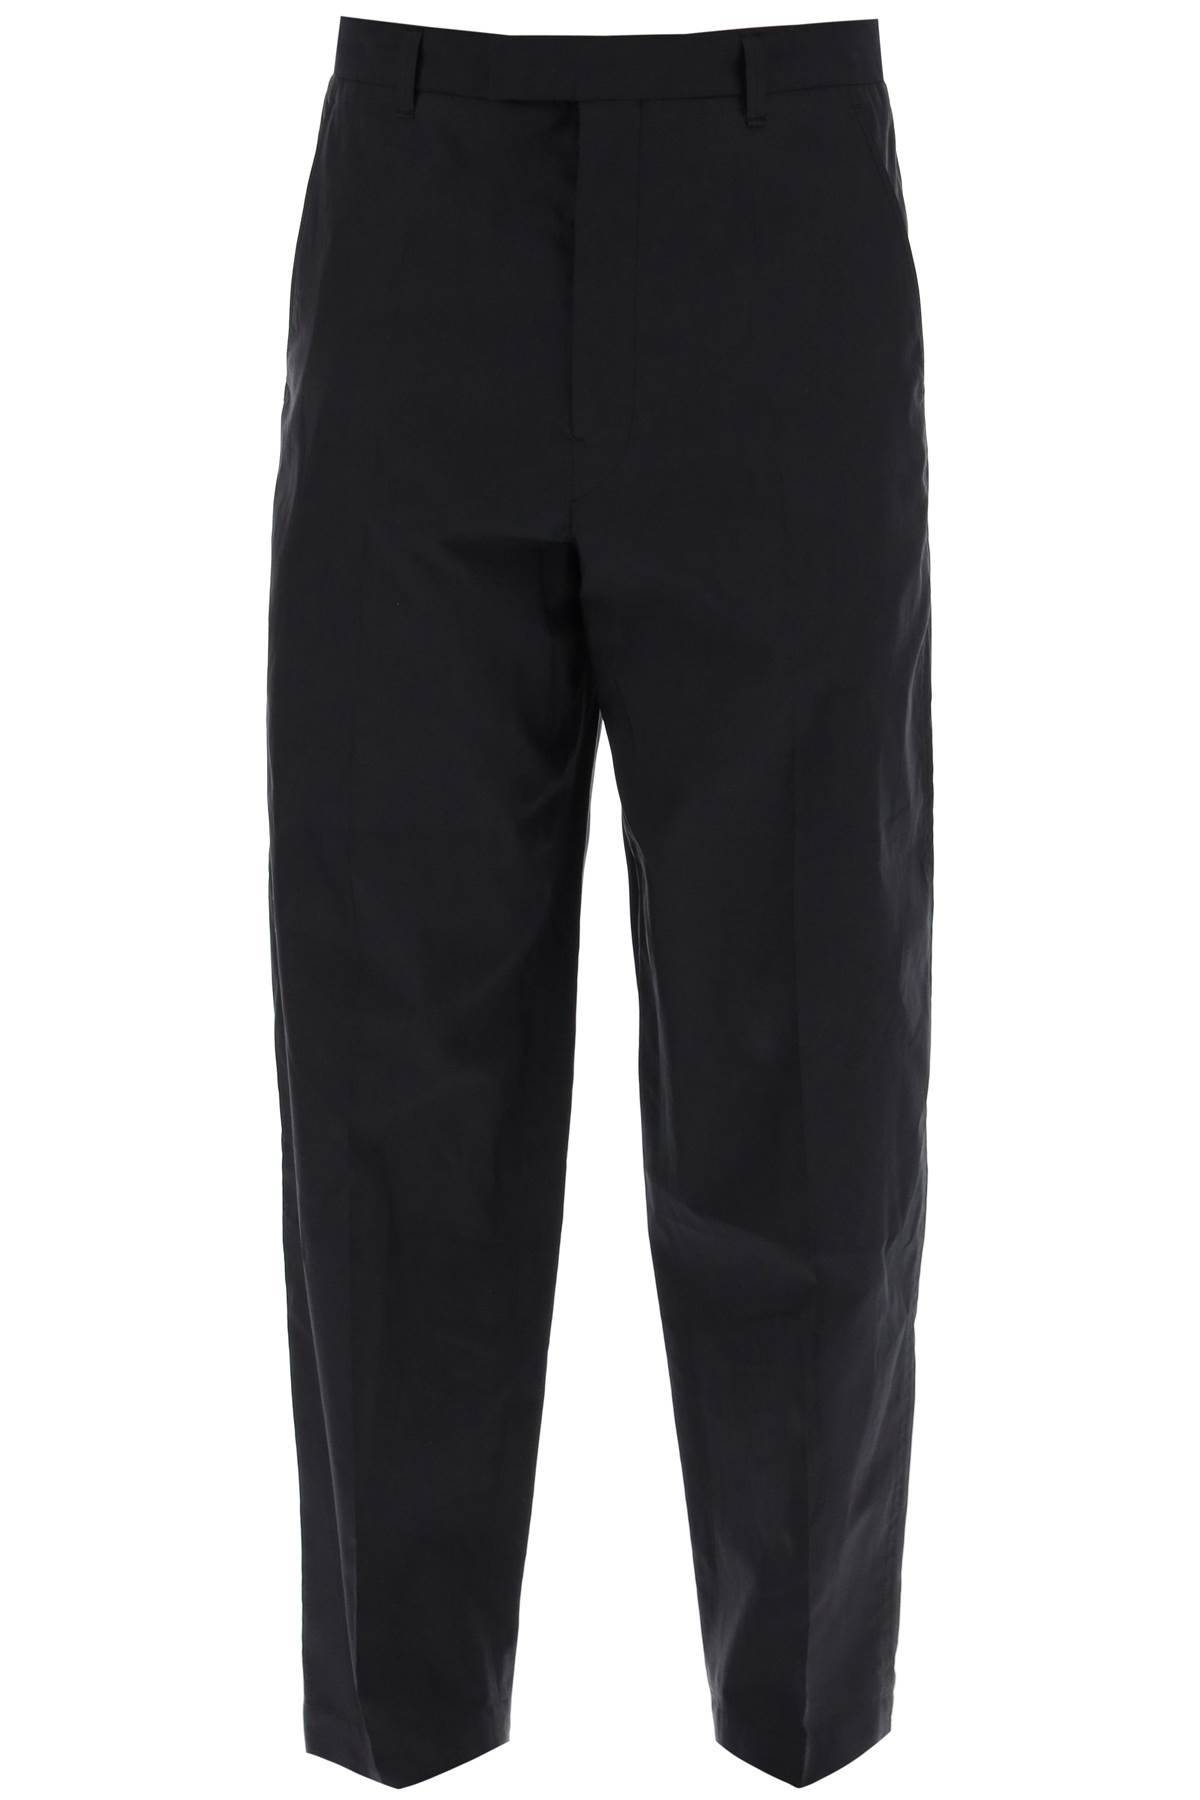 Lemaire LEMAIRE cotton and silk carrot pants for men